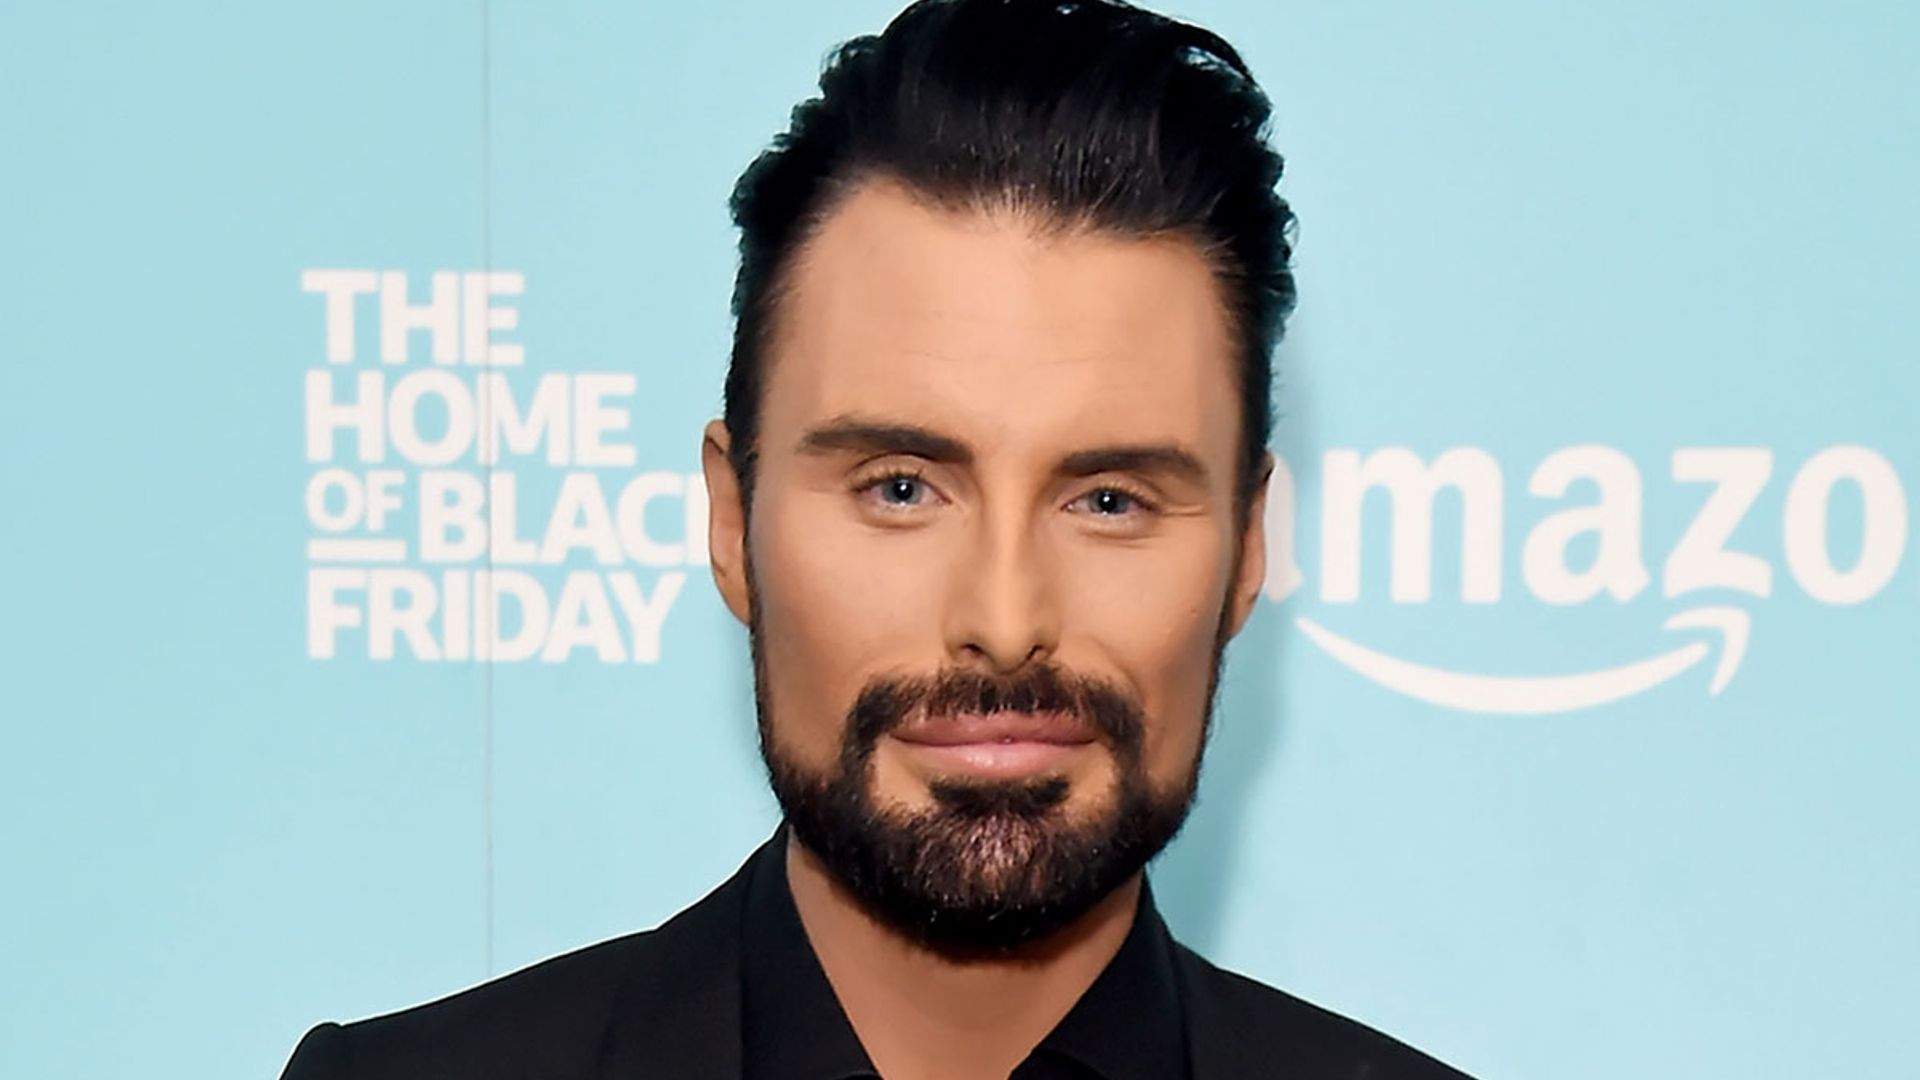 Rylan Clark shares exciting news after 'upsetting' year